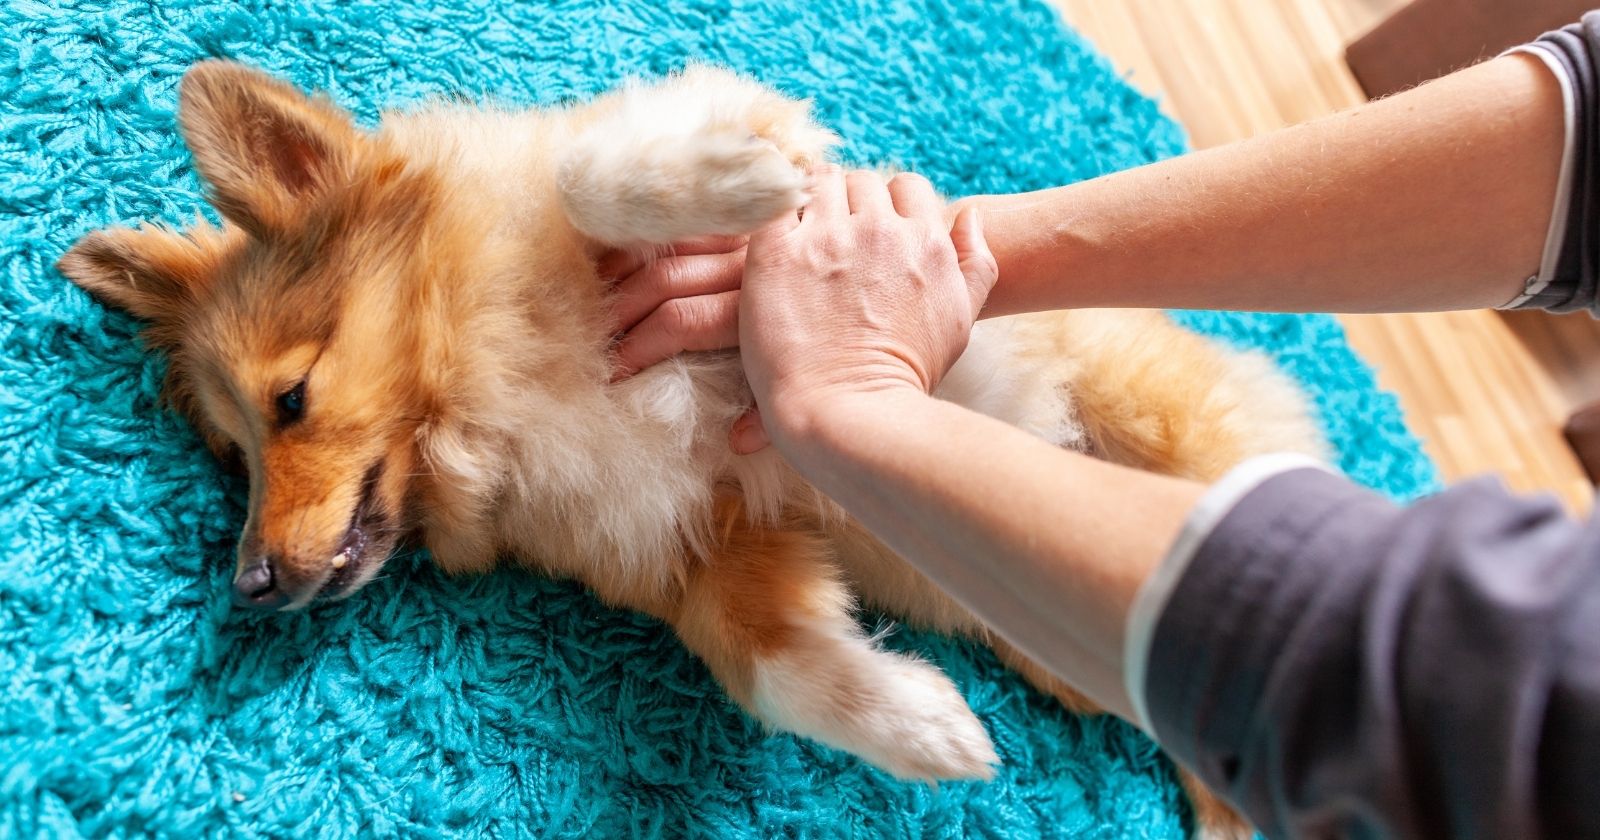 The first aid gestures you need to know to save your pet